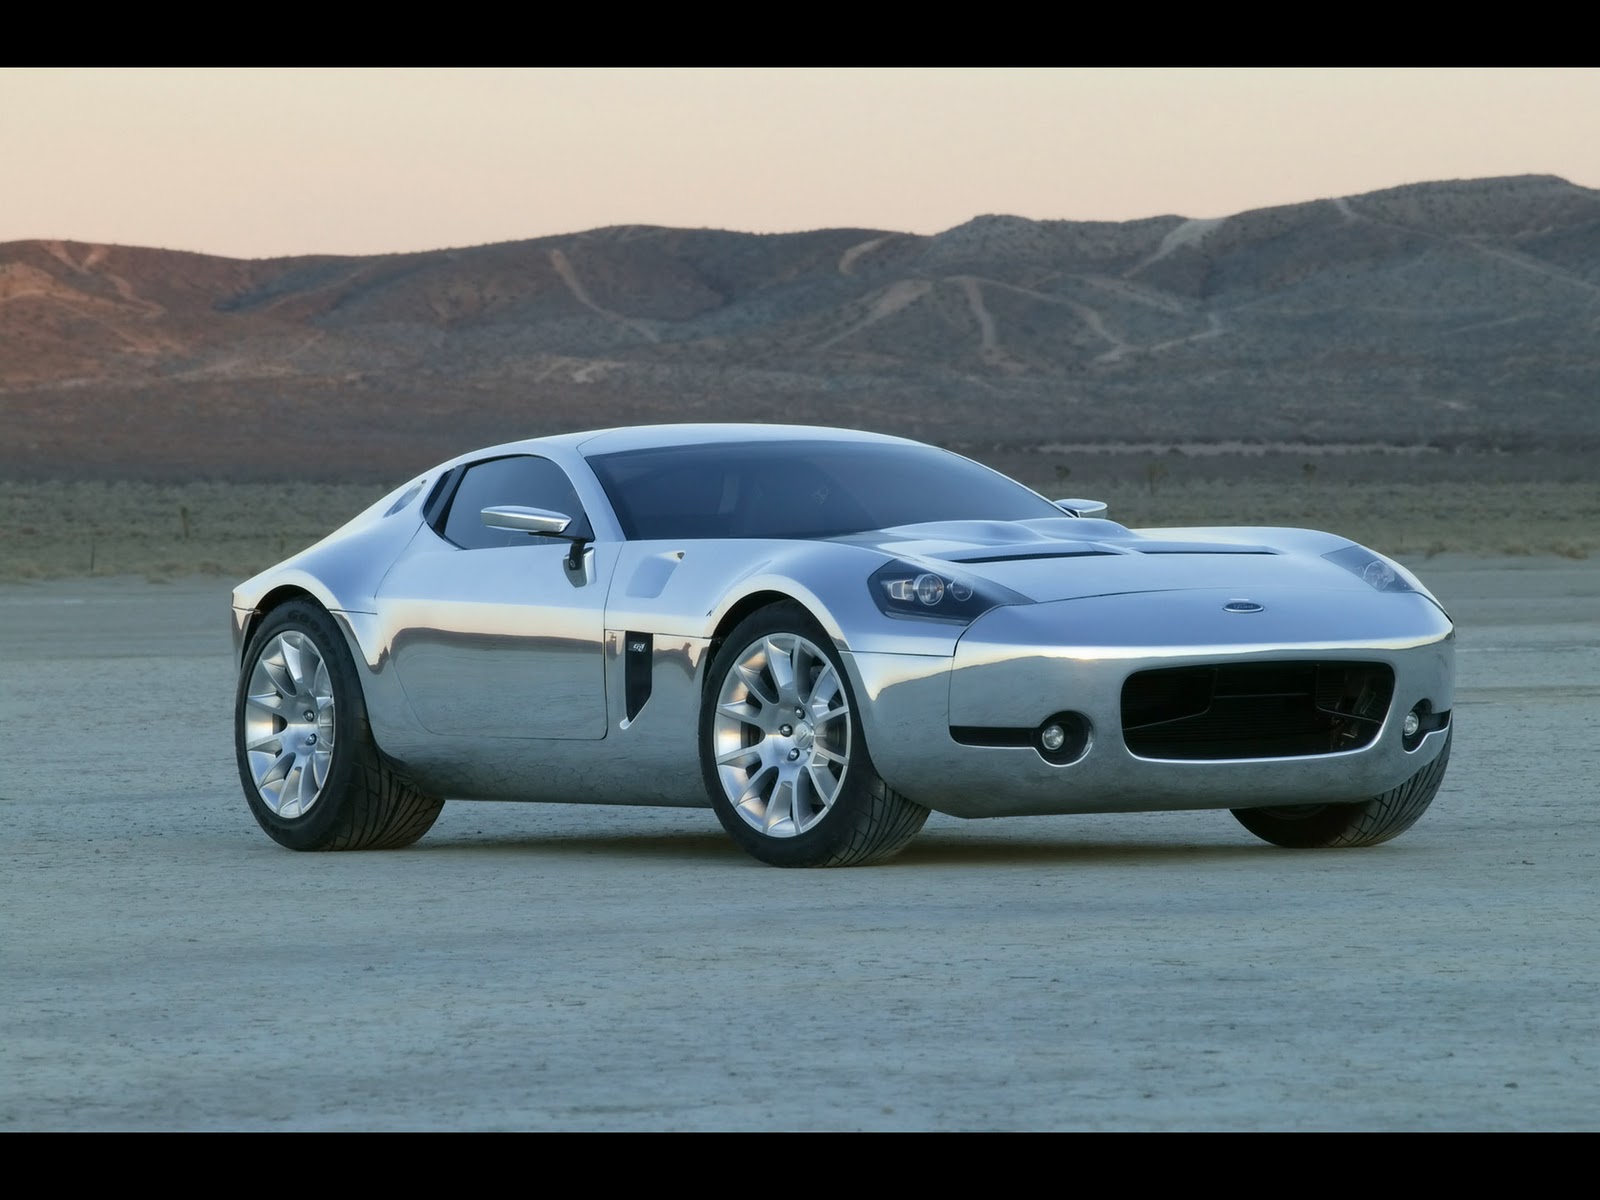 2005 Ford shelby gr1 concept with aluminum body #8